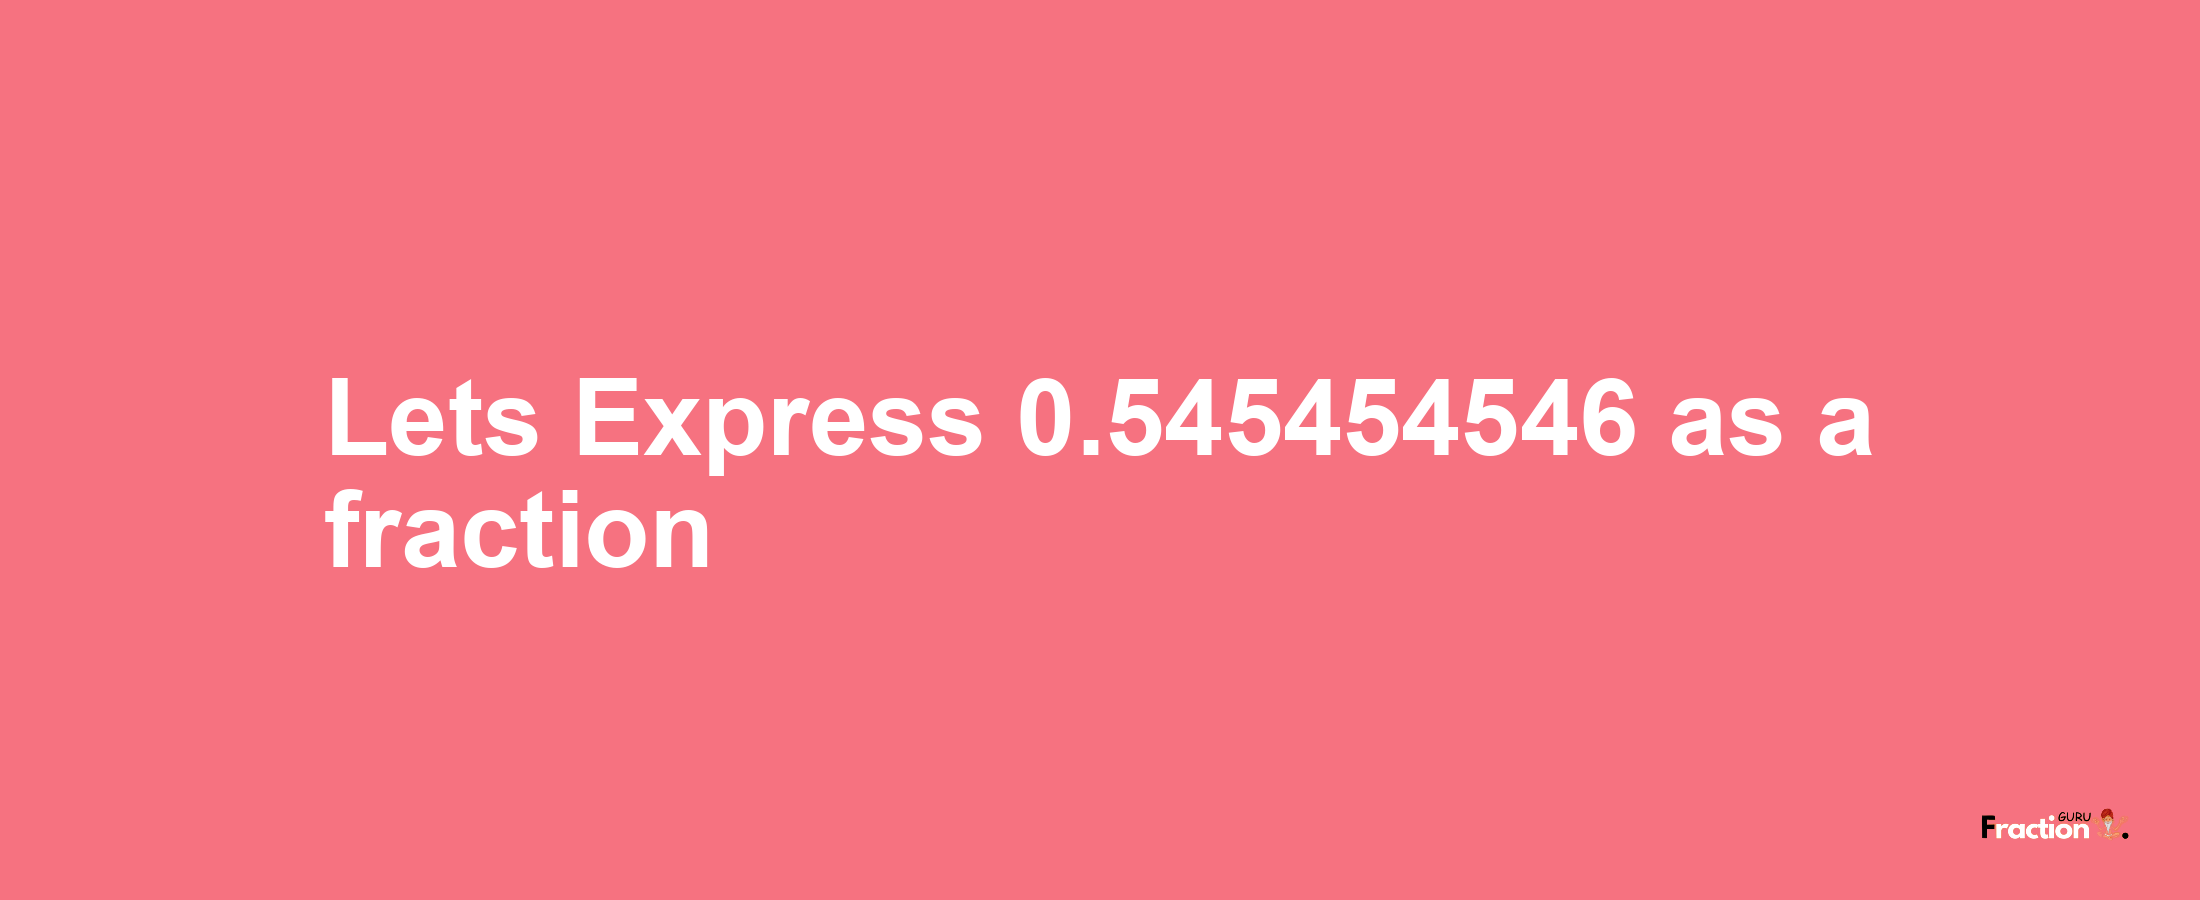 Lets Express 0.545454546 as afraction